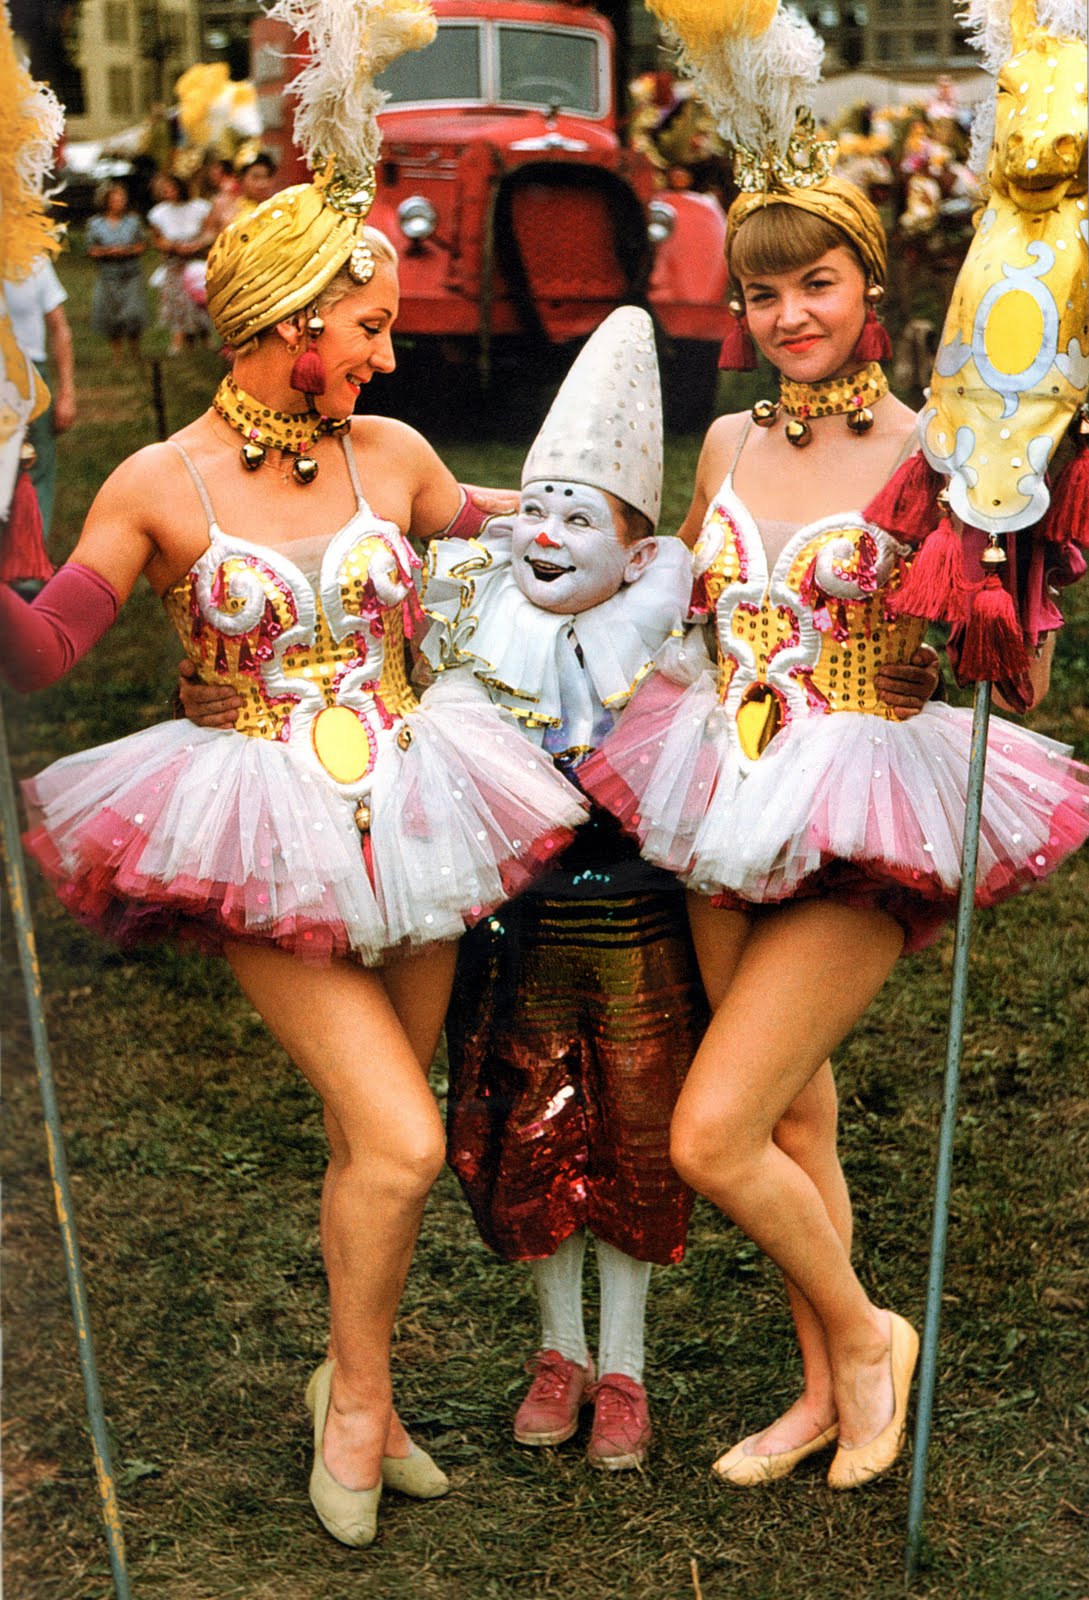 15 Wonderful Color Portrait Photos of Circus Performers From Between ...